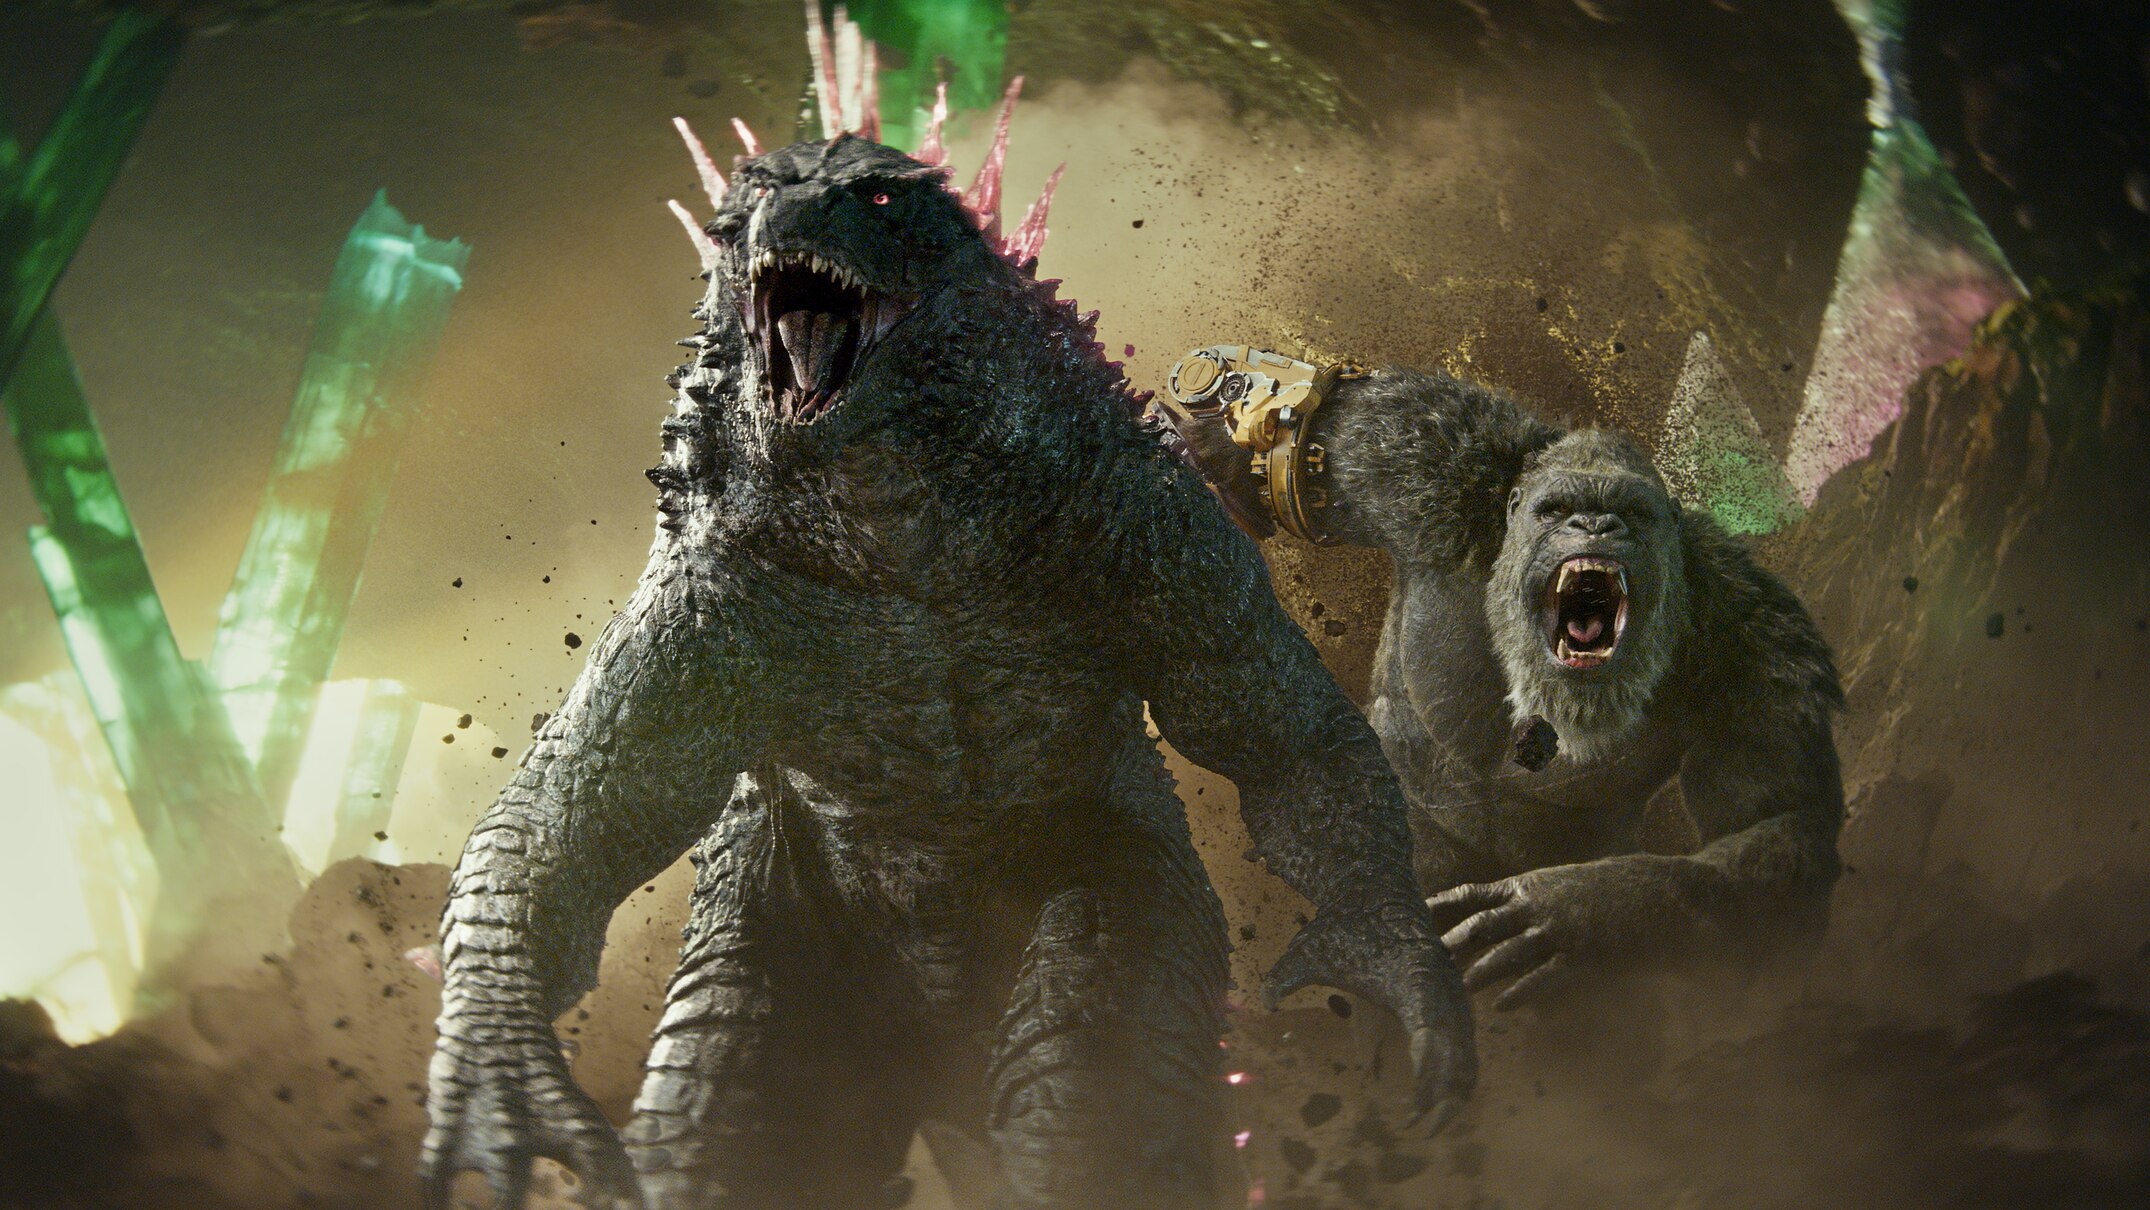 godzilla x kong: the new empire promises mindless fun but lacks the imagination to fire up the senses